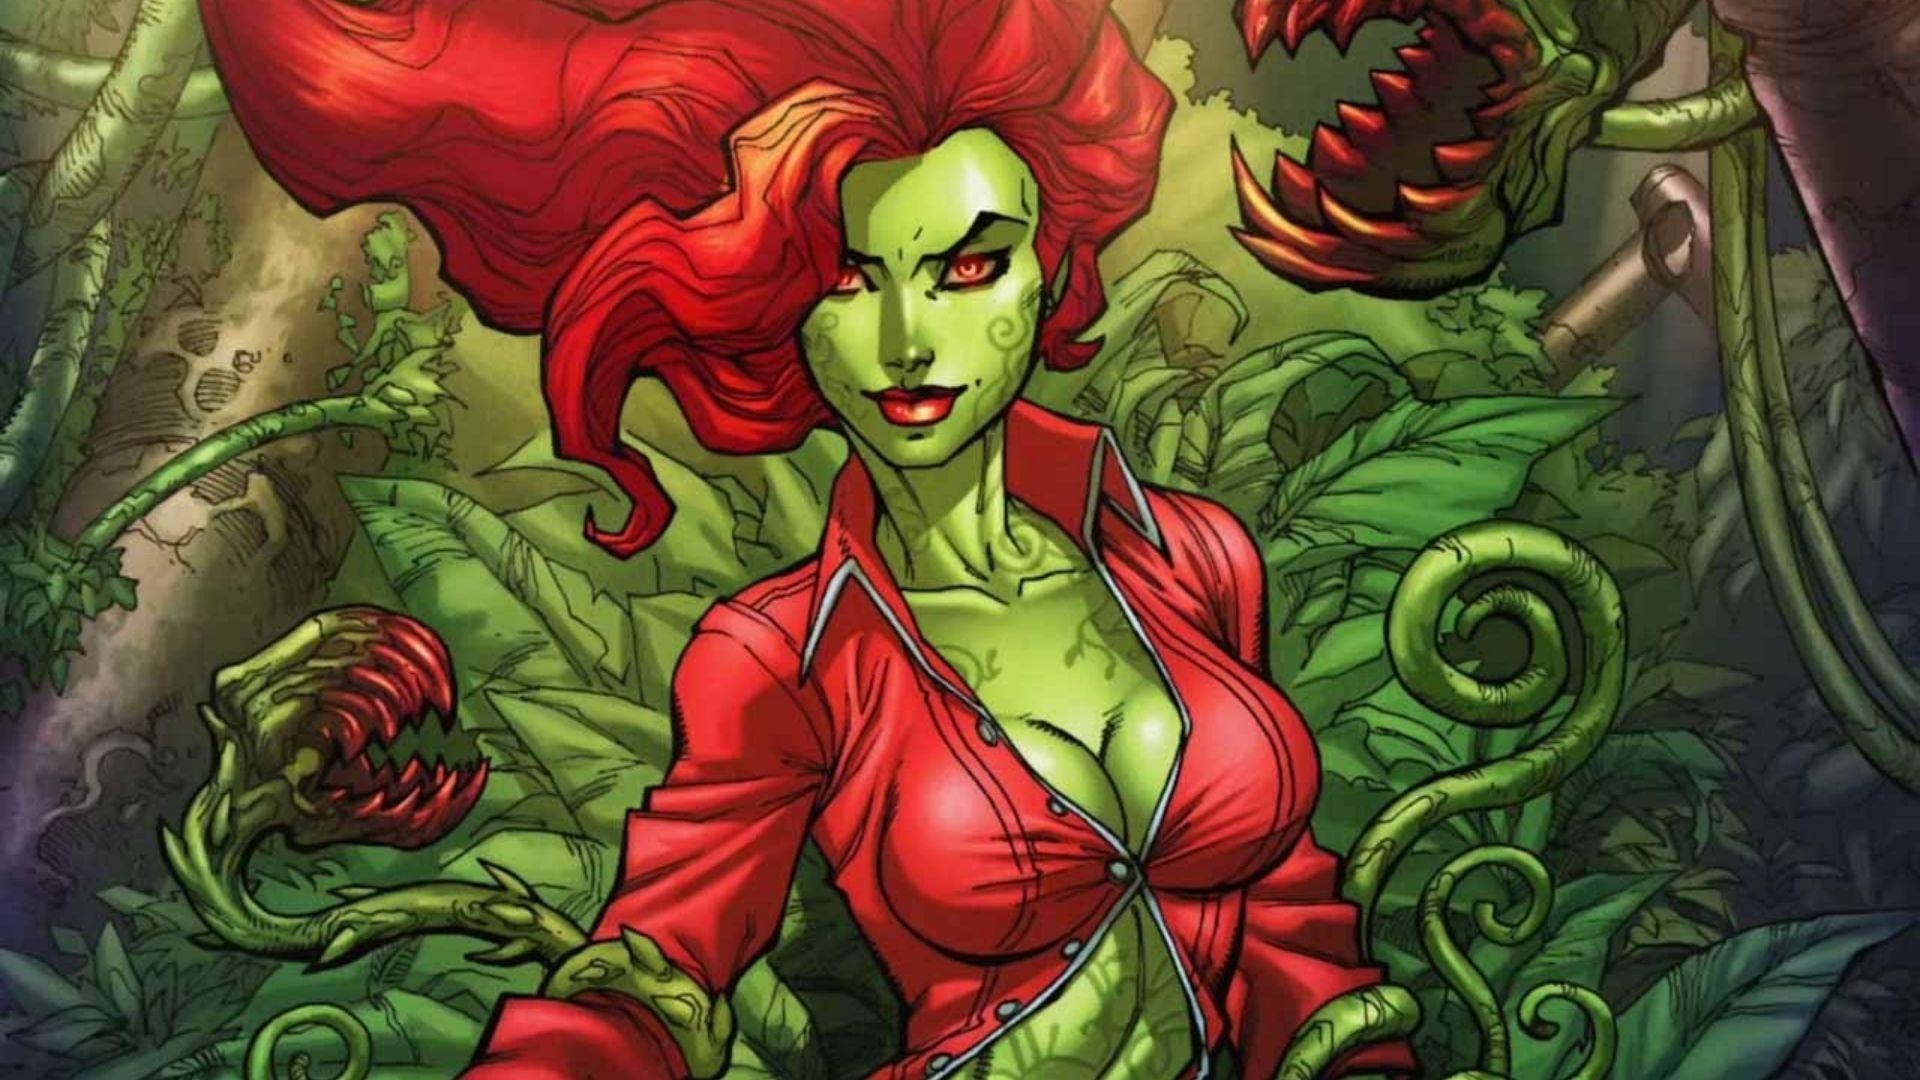 Poison Ivy Wallpapers, Pictures, Image.